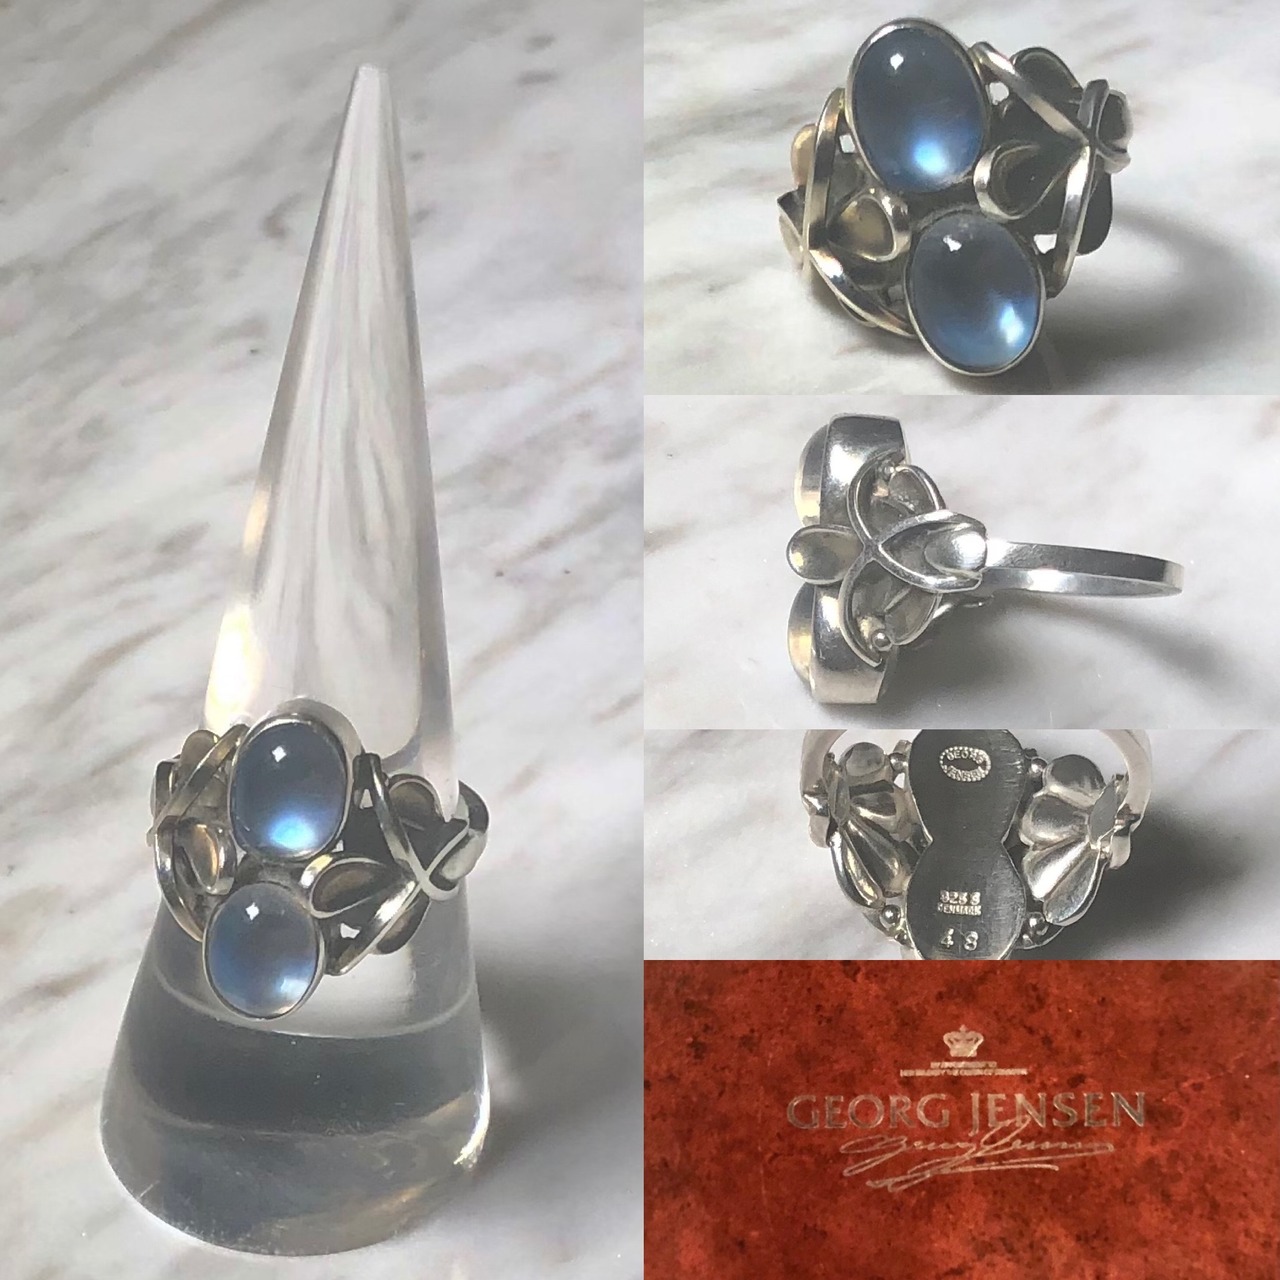 GEORG JENSEN silver ring set with 2 moonstones "48"